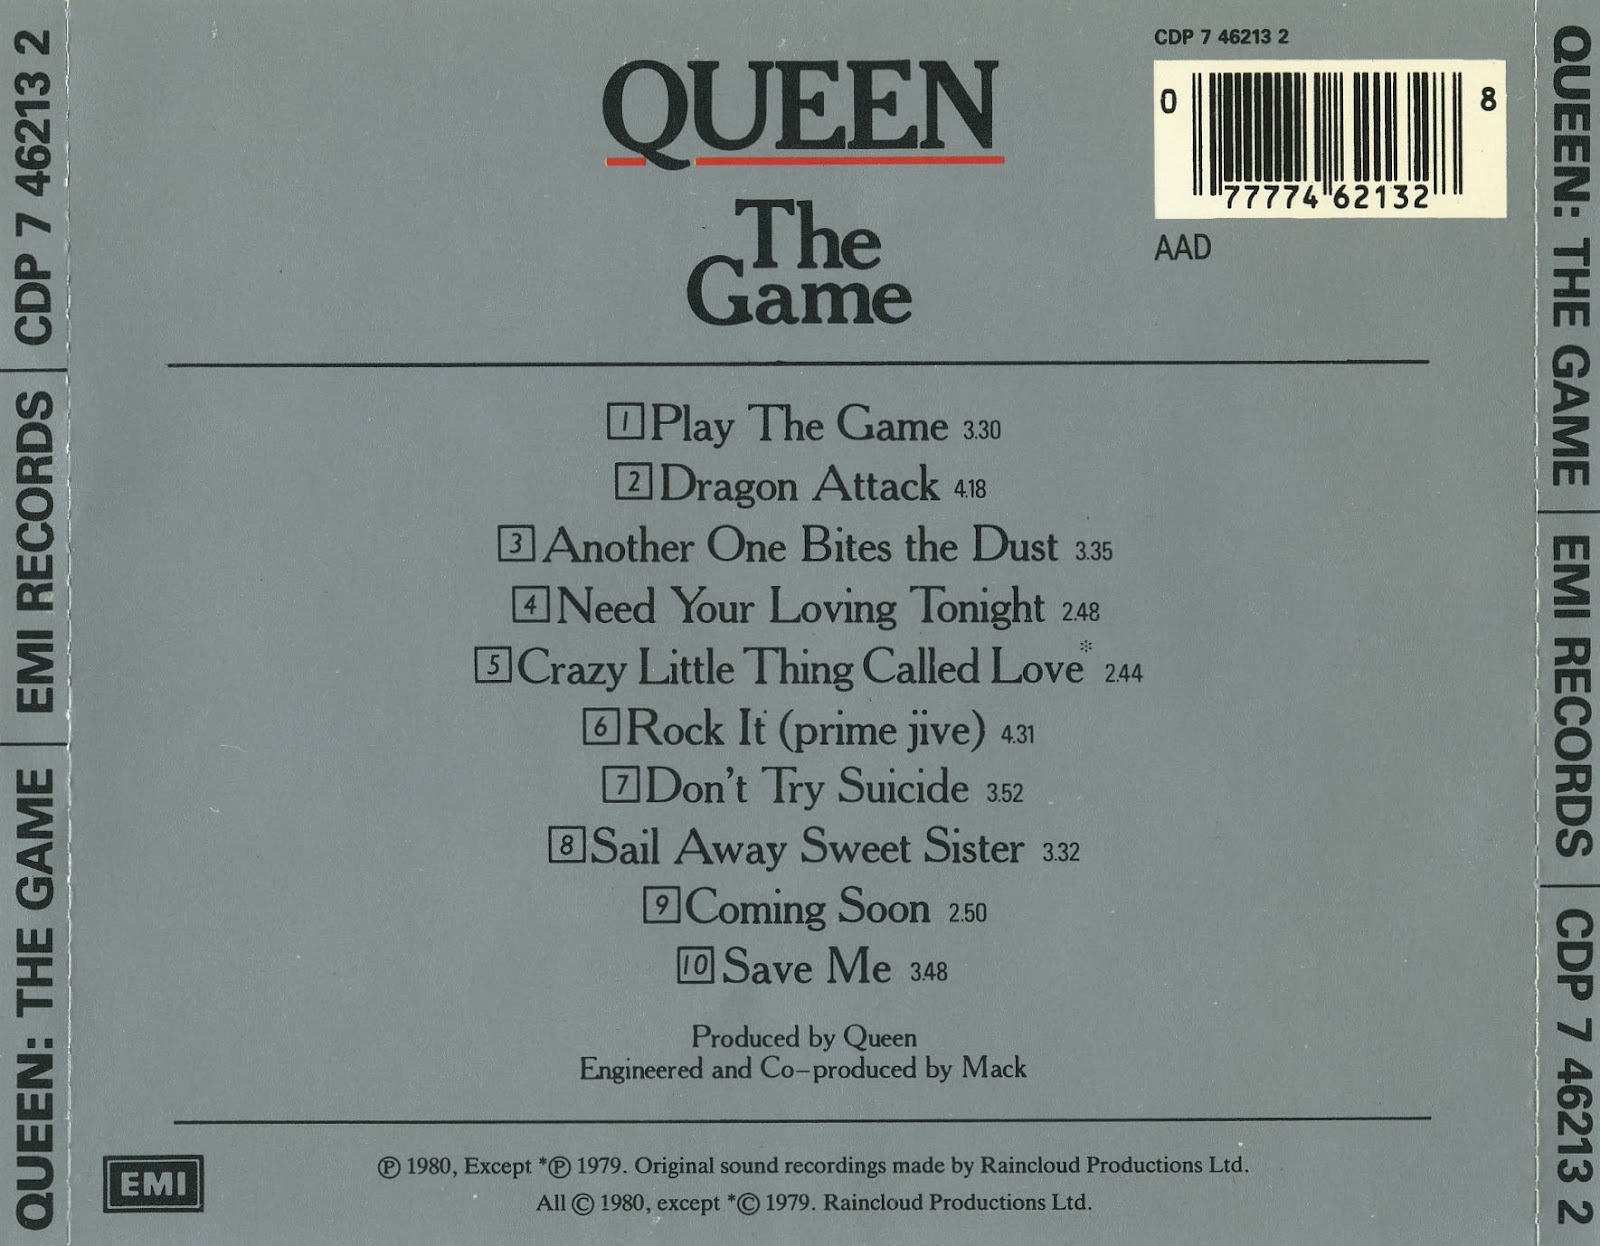 Bite the dust текст. CD Queen: the game. Queen the game 1980. Queen "the game (LP)". Queen the game 1982.